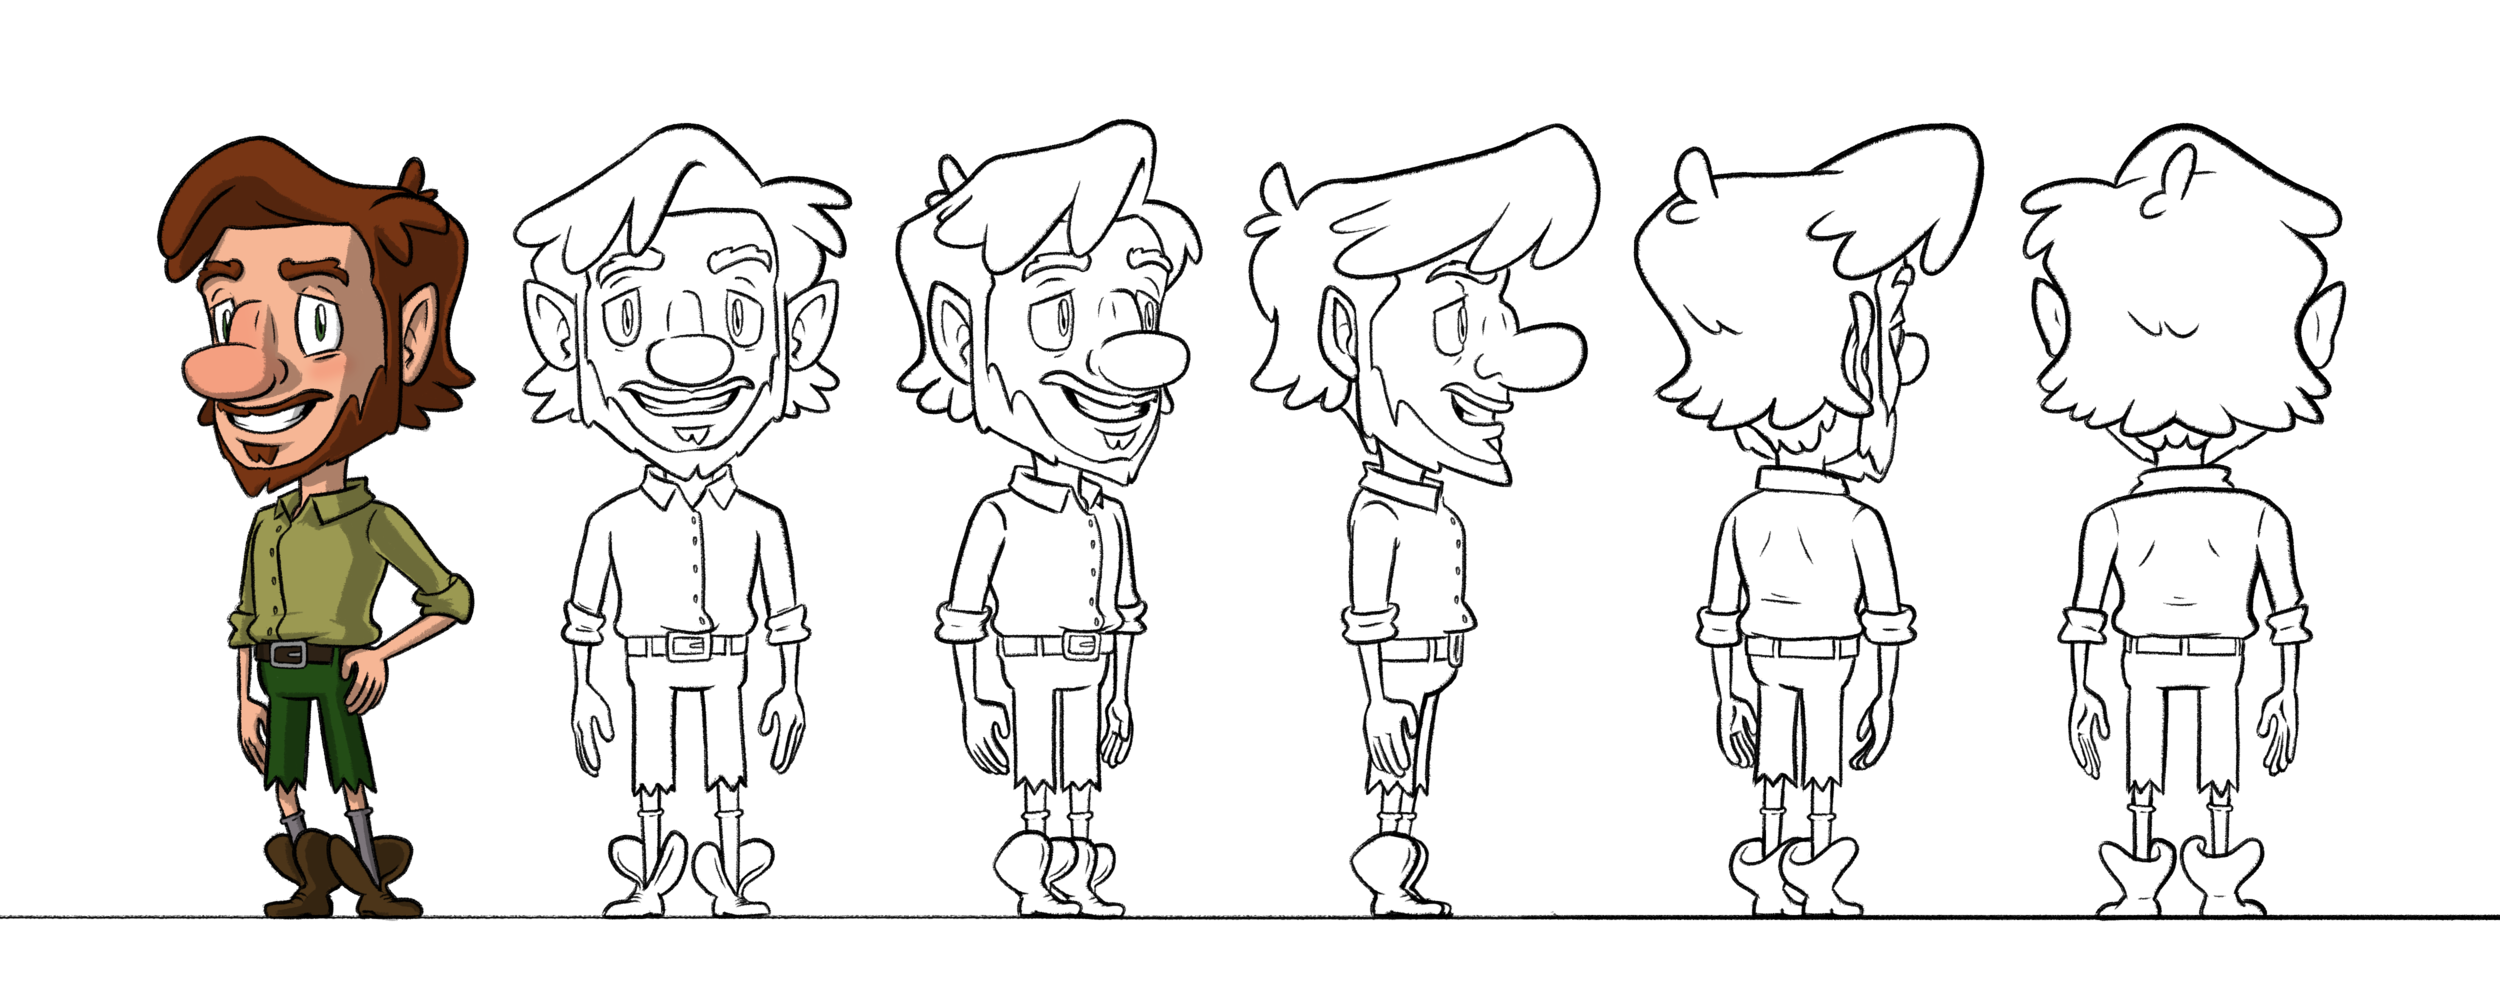 Russule_turnaround.png